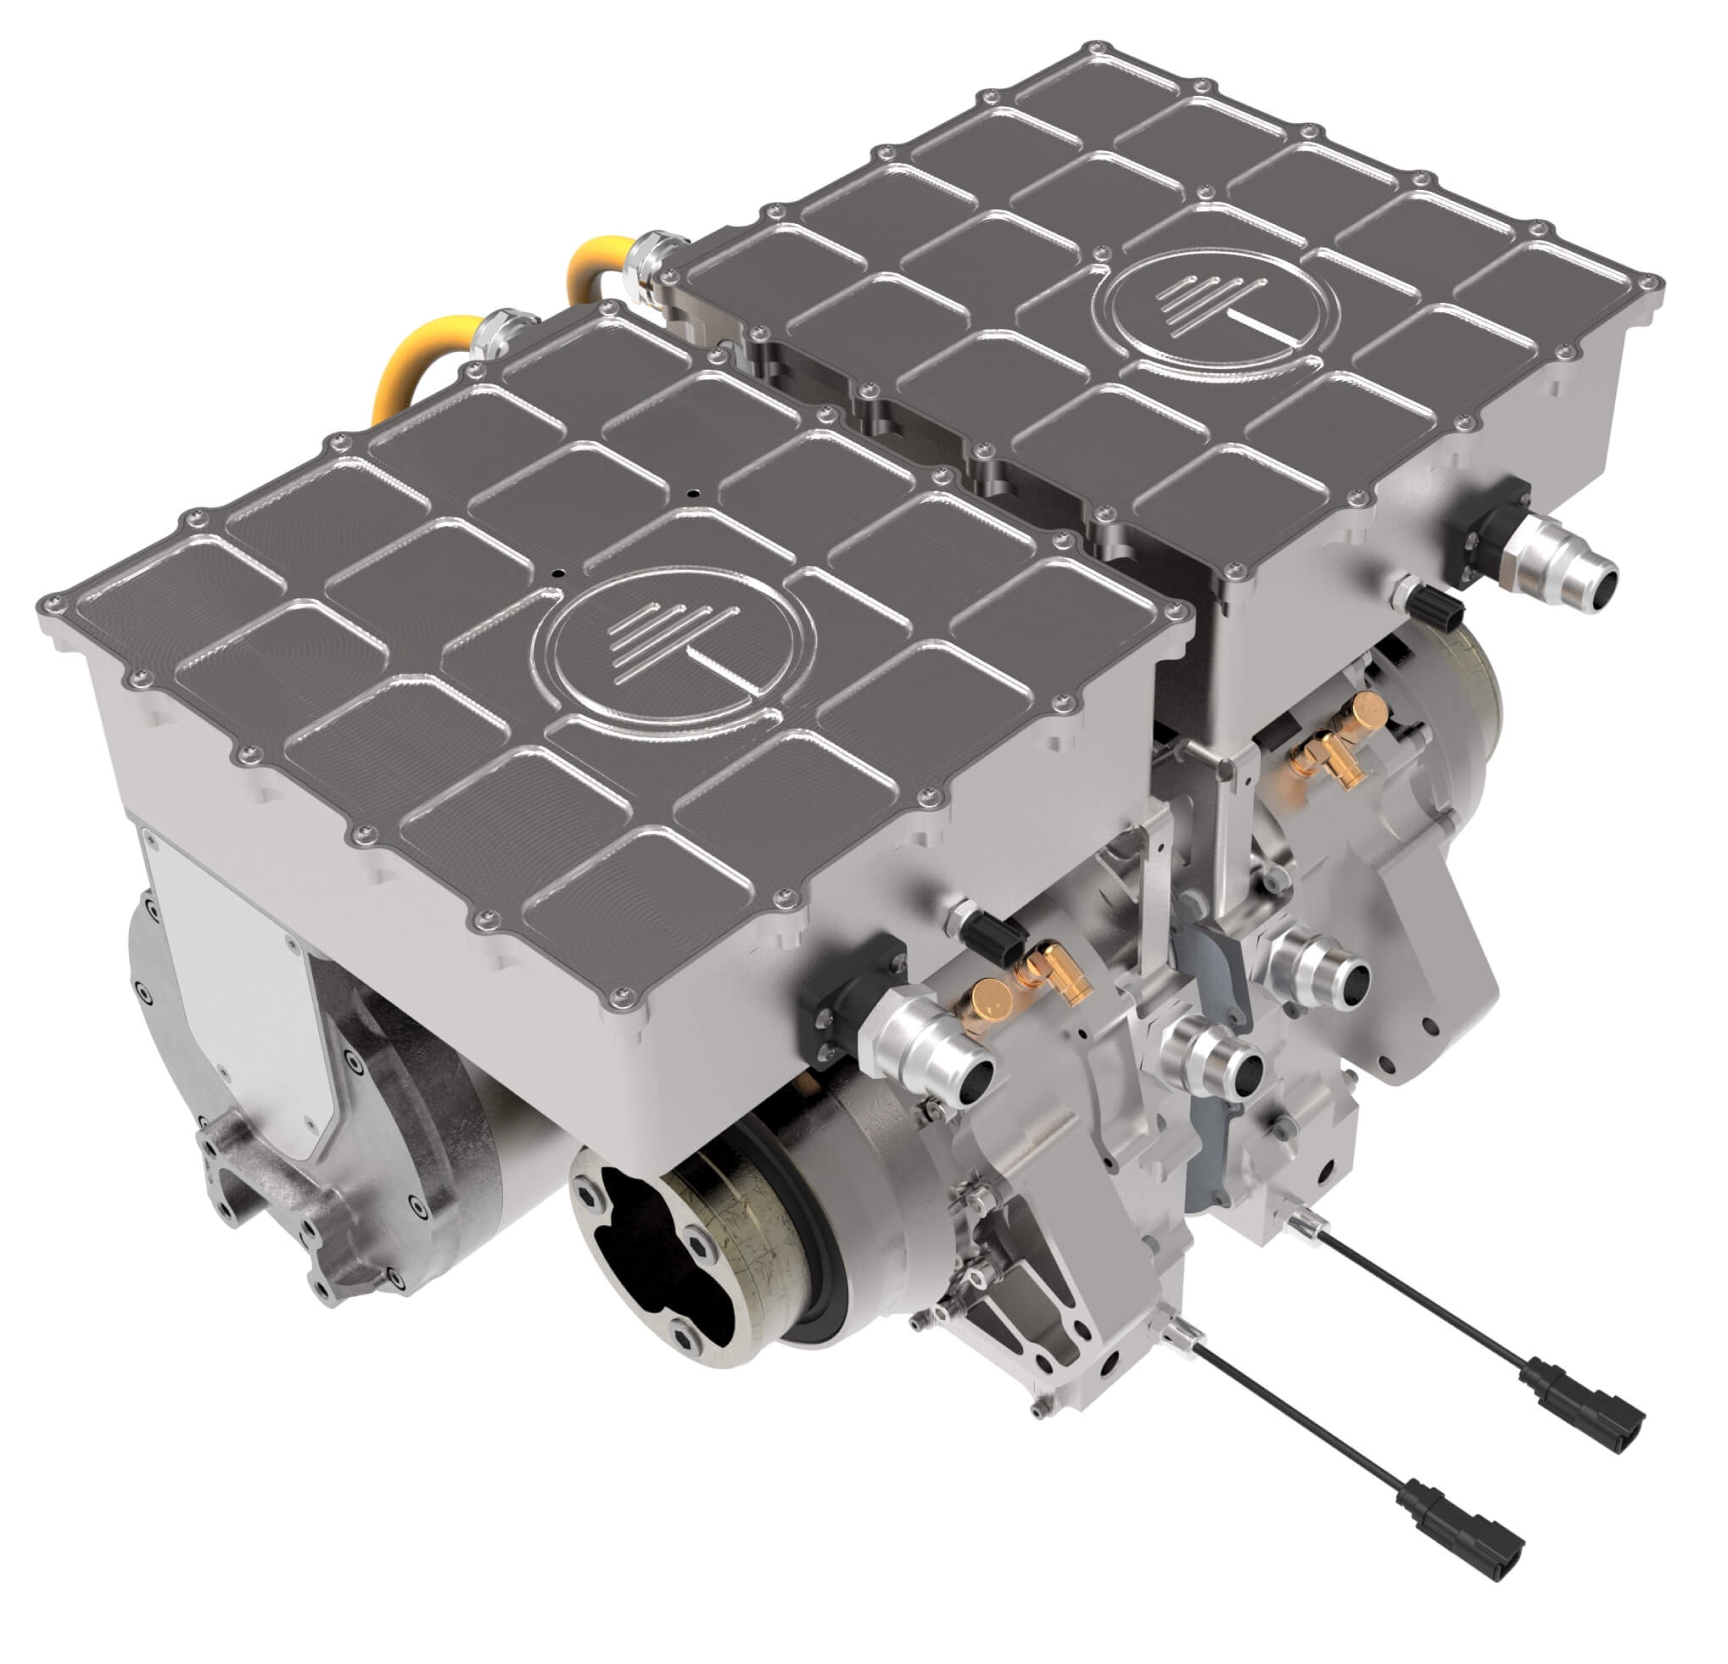 Equipmake Reveals High-Power Electric Drive System with 3D Printed Motor Housing